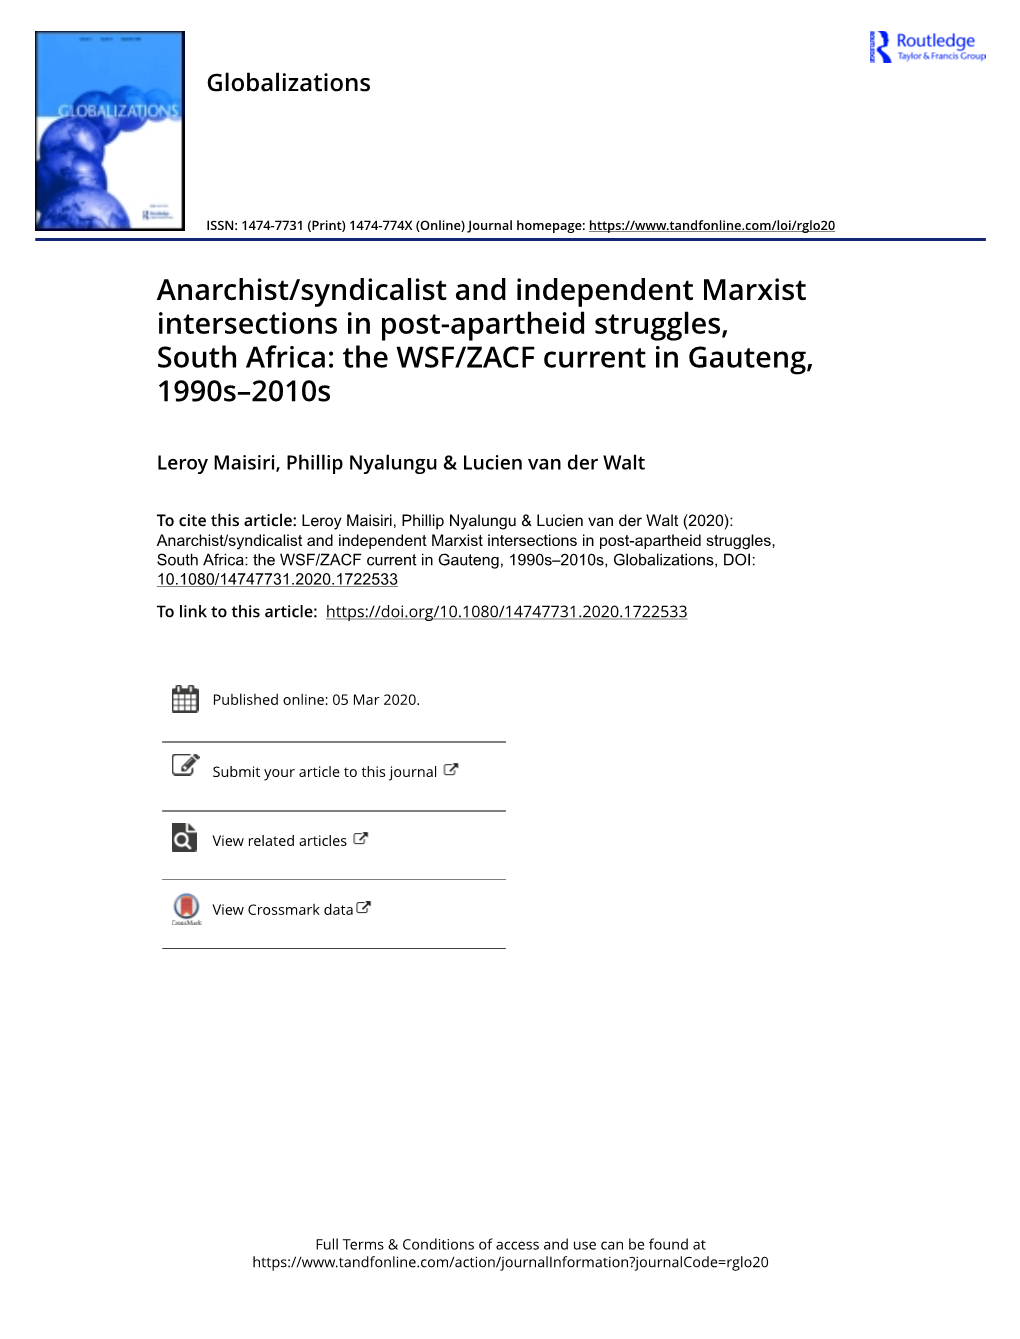 Anarchist/Syndicalist and Independent Marxist Intersections in Post-Apartheid Struggles, South Africa: the WSF/ZACF Current in Gauteng, 1990S–2010S